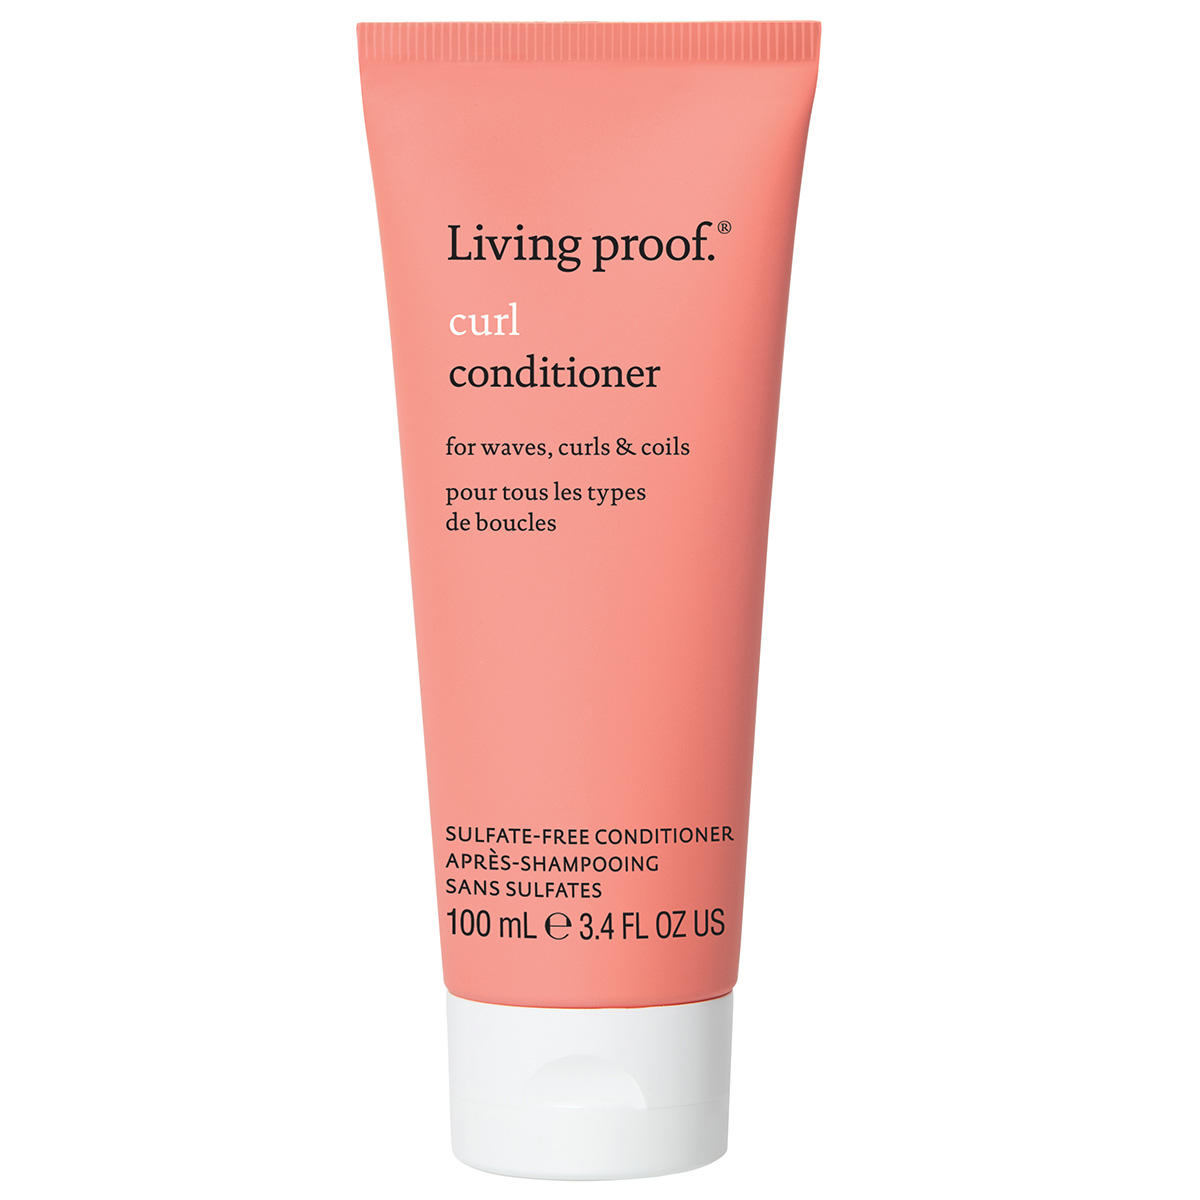 Living proof curl Conditioner  - 1